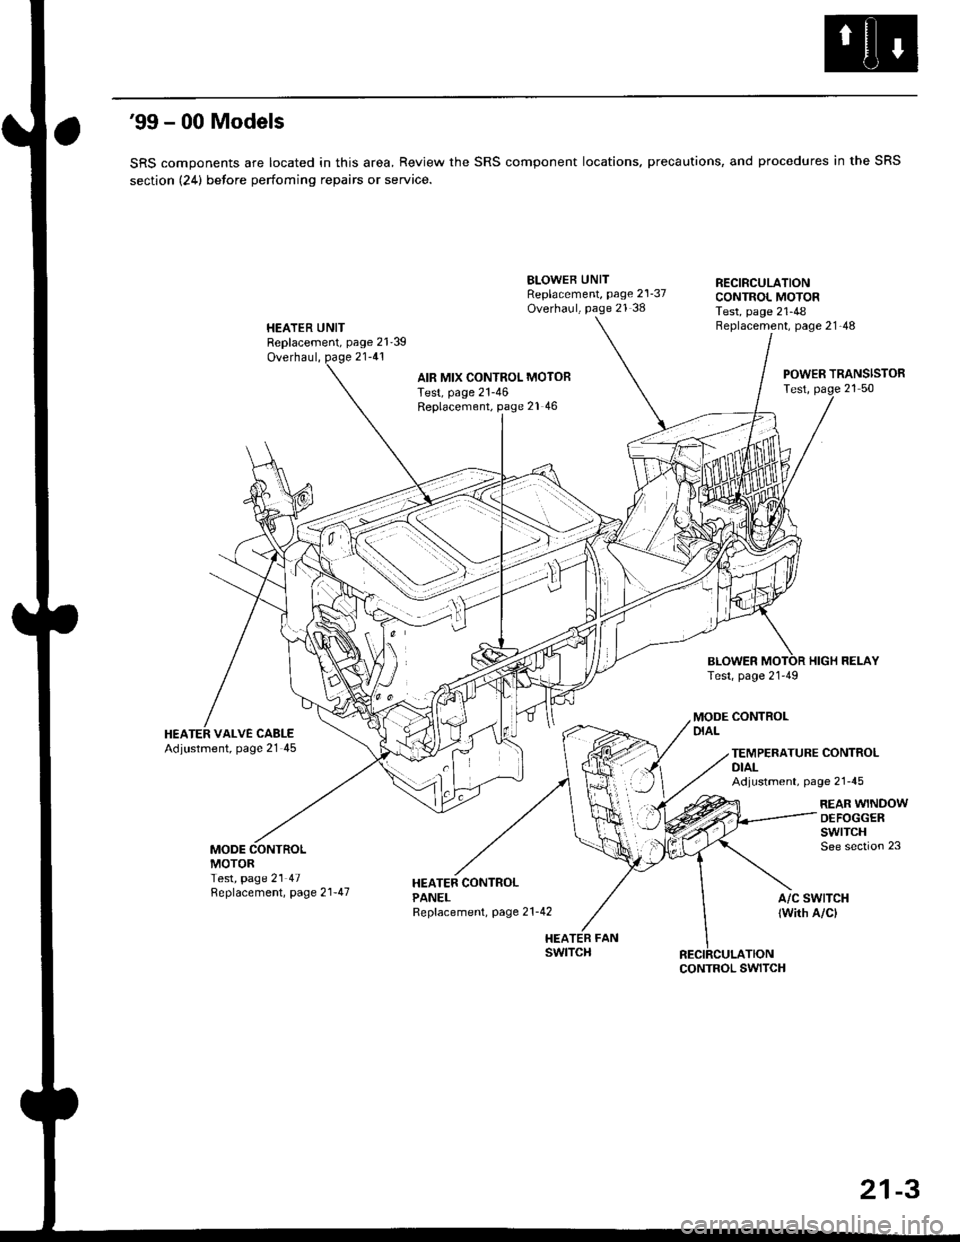 HONDA CIVIC 2000 6.G Service Manual 99 - 00 Models
SRS components are located in this area, Review the SRS component locations, precautions, and procedures in the SRS
section (24) betore perfoming repairs or service.
HEATER UNITReplace